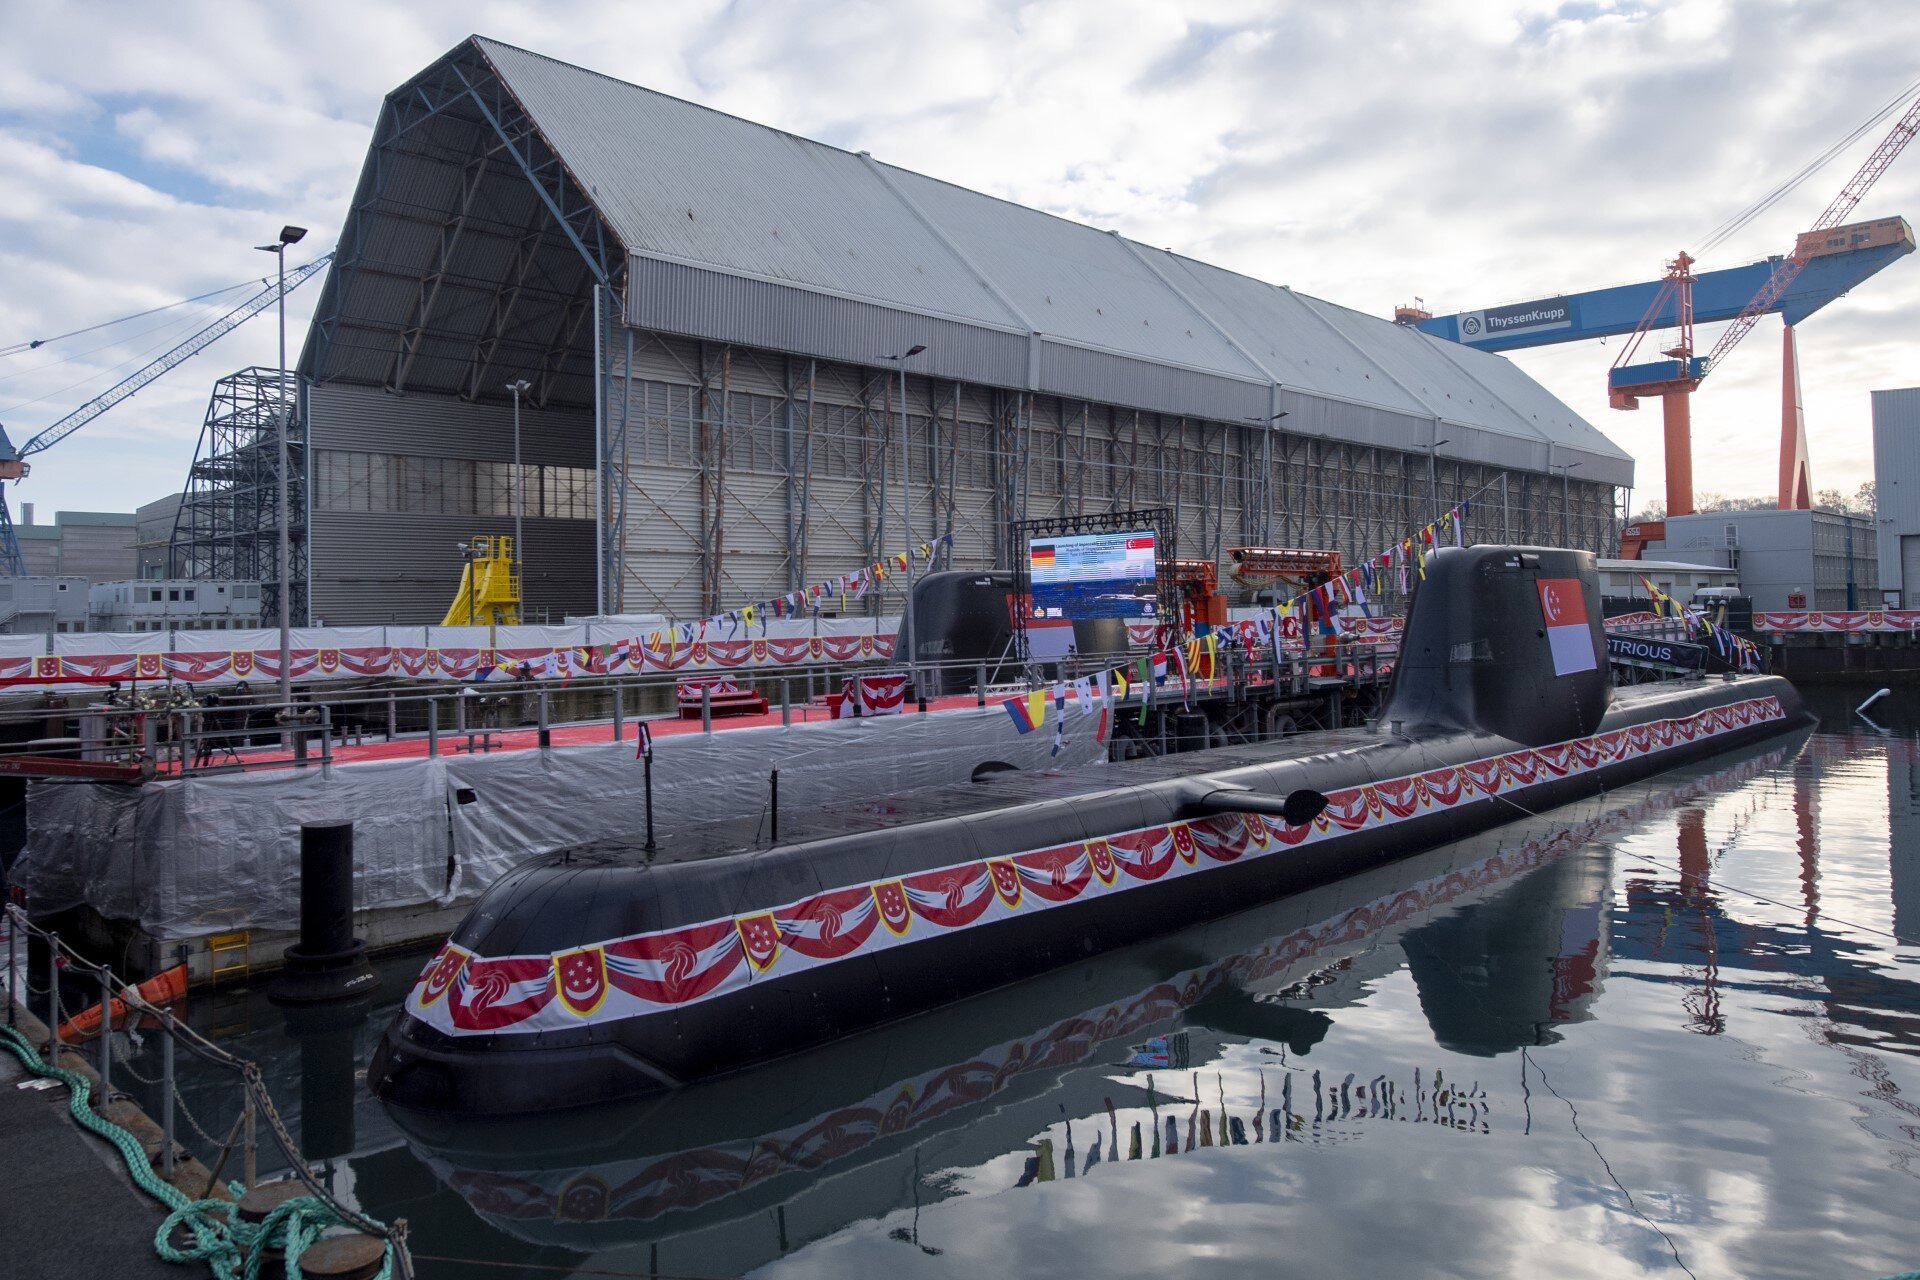 Navy launches its second and third Invincible-class submarines